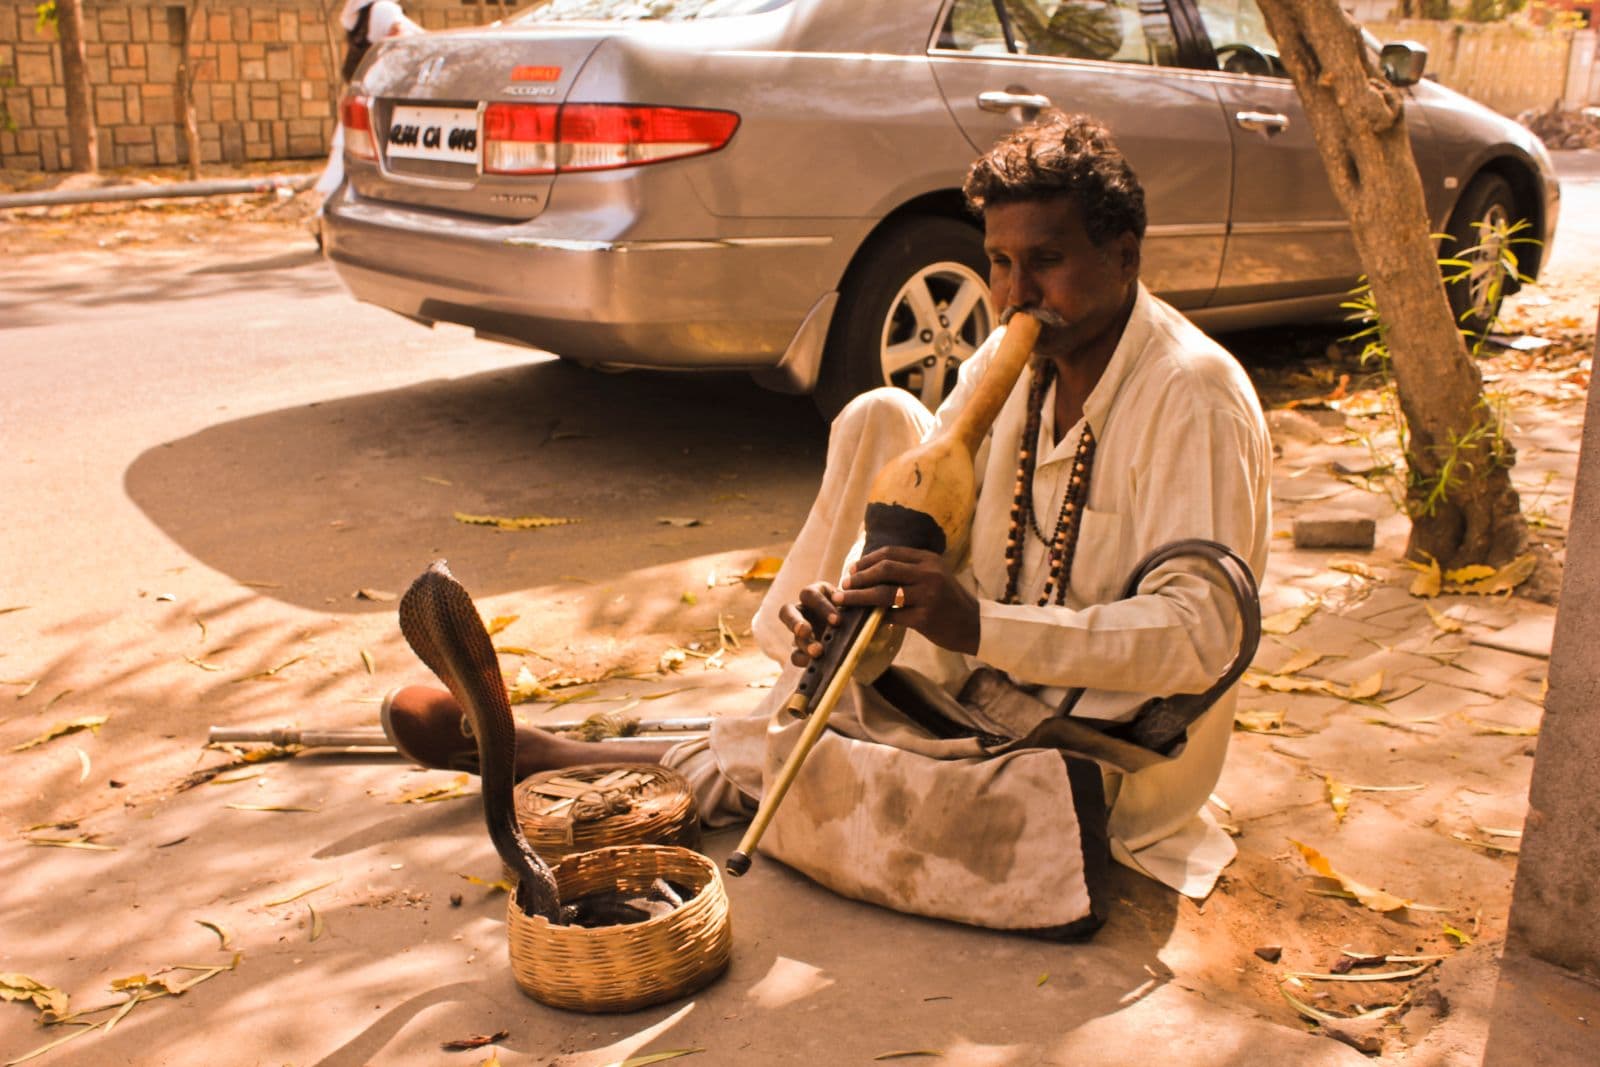 The Snake Charmers